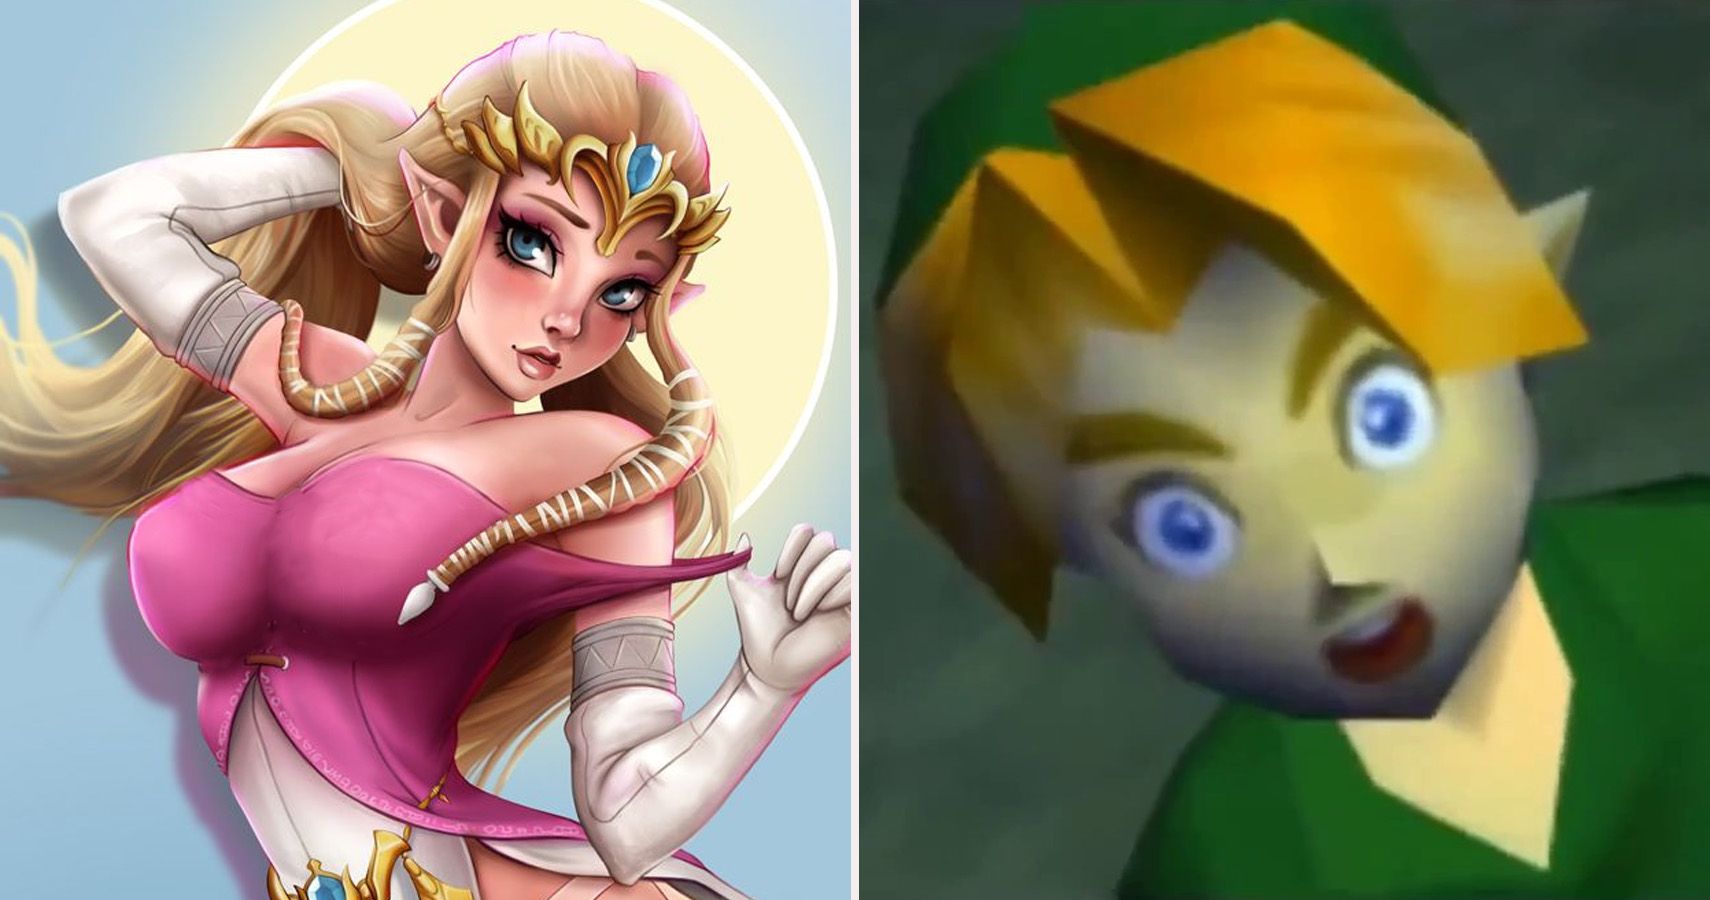 OoT] Fun Fact: Link's design in Ocarina of Time is based on a